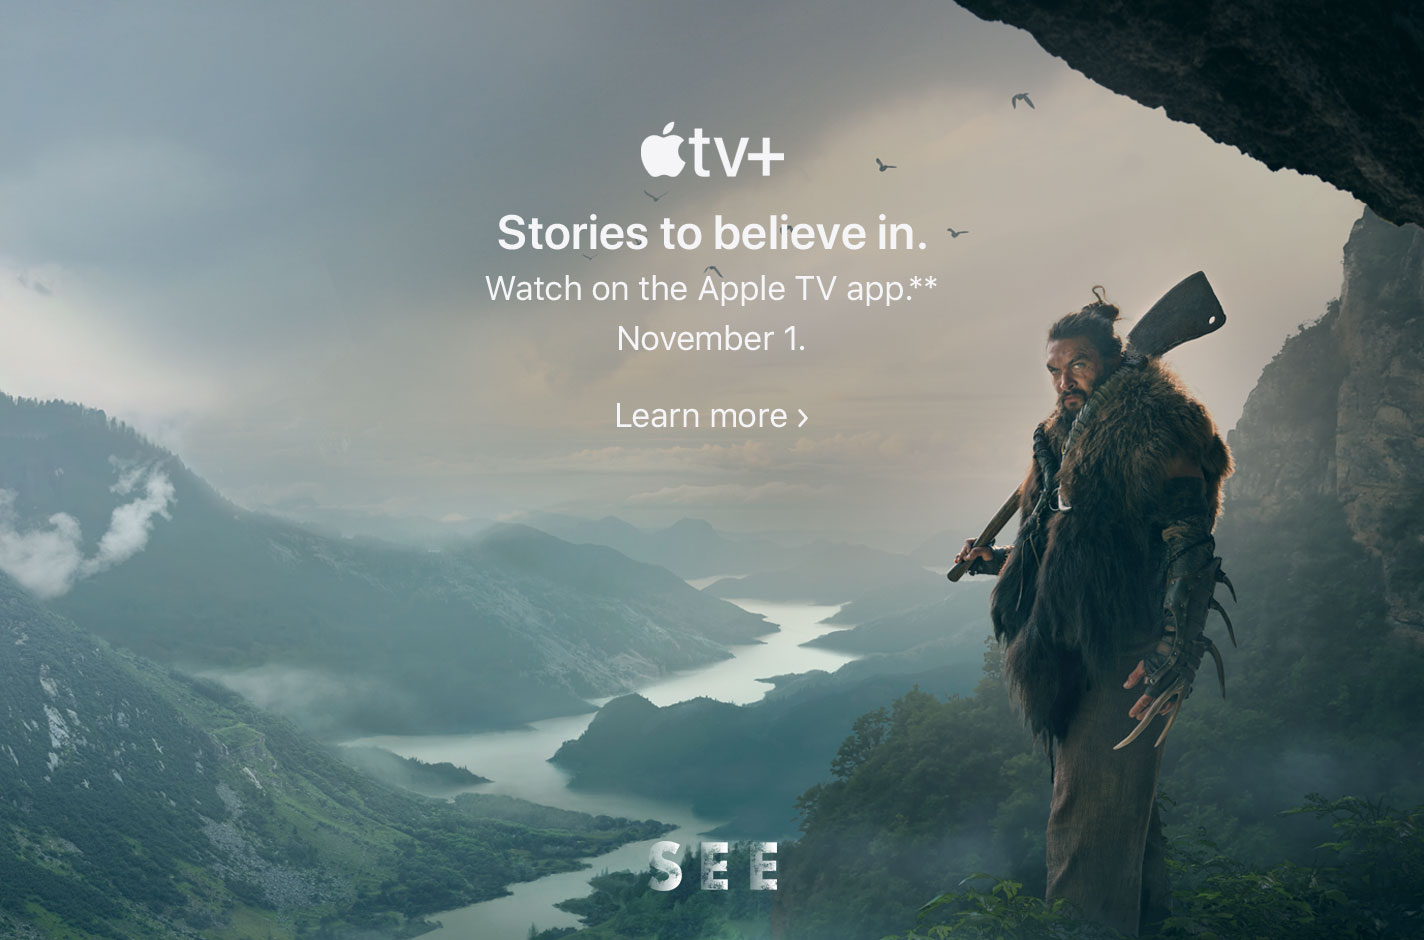 Apple TV+. Stories to believe in. Watch on the Apple TV app.** November 1. Learn more.